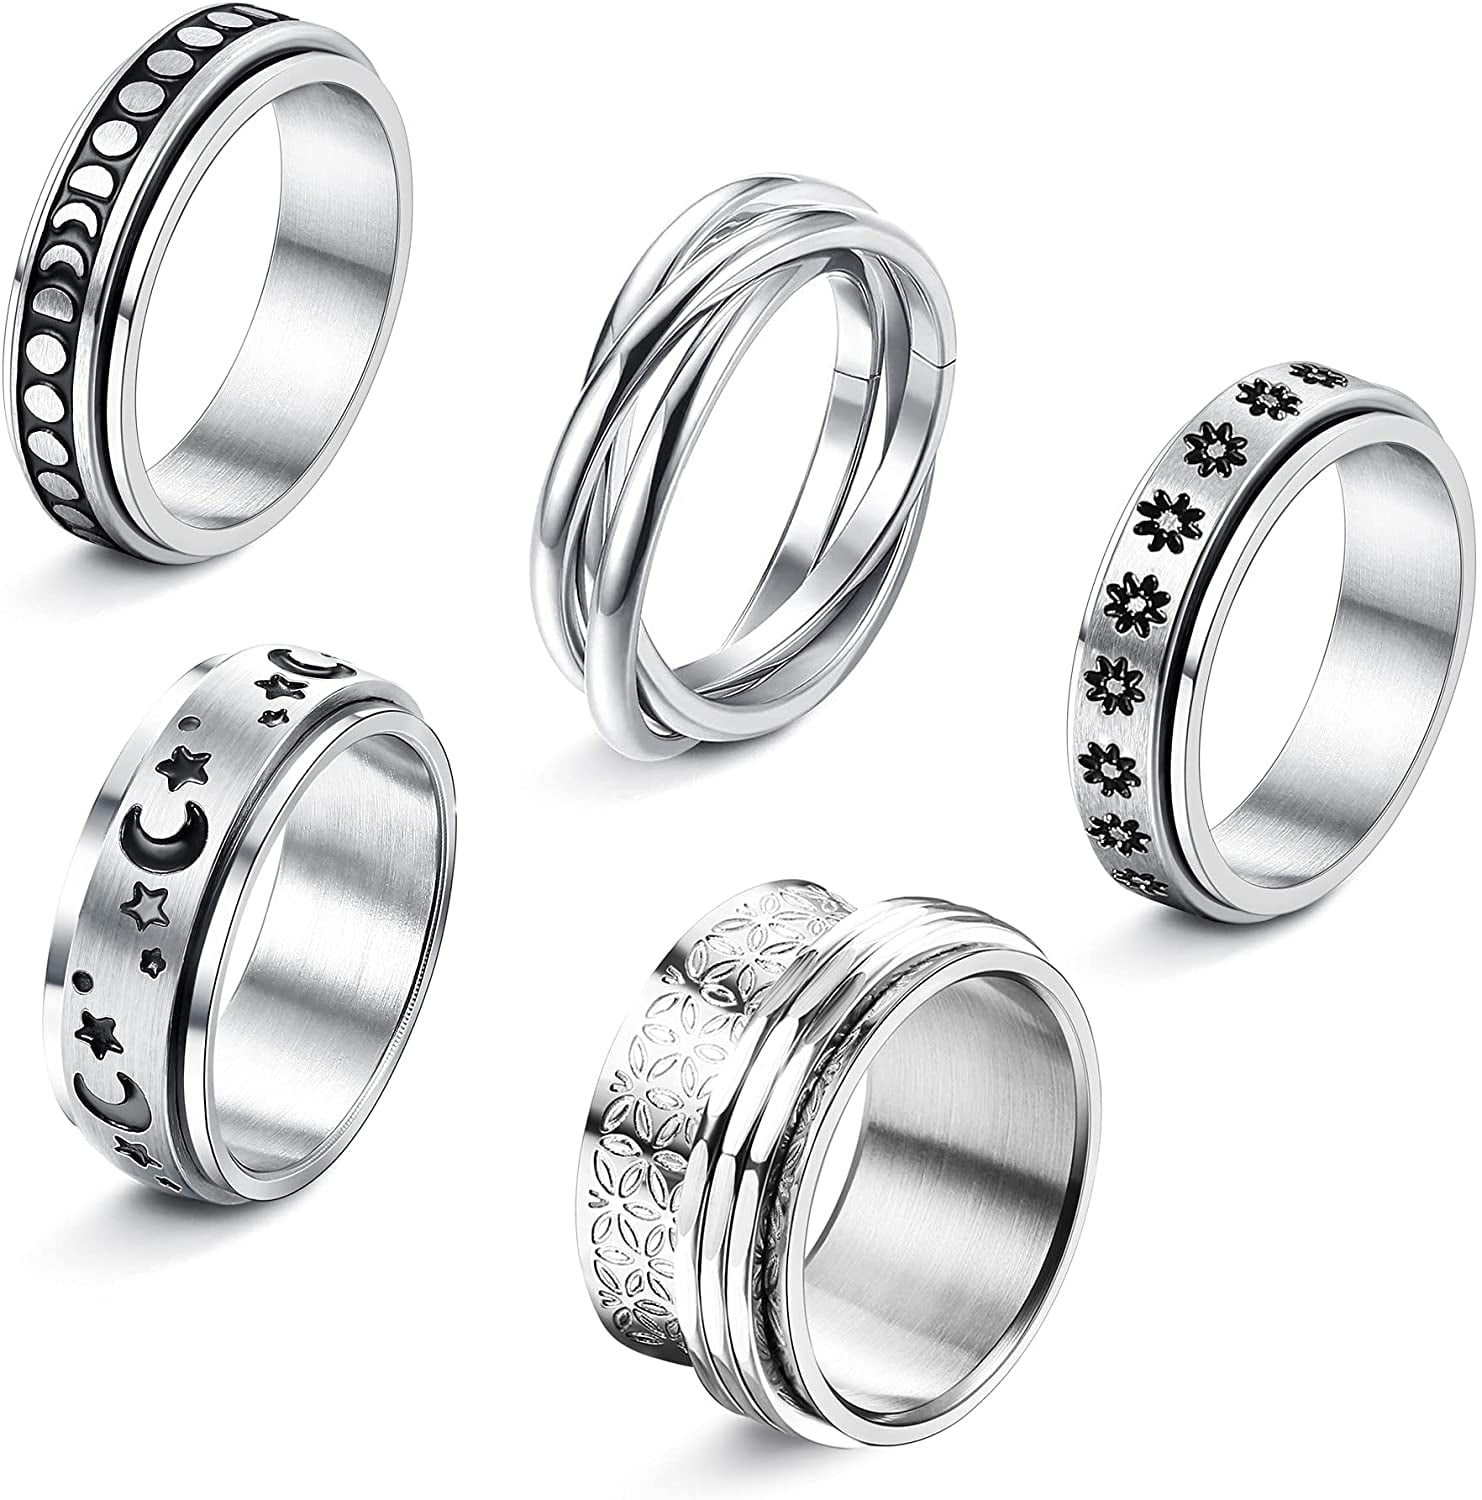 Jstyle 5Pcs Spinner Rings for Anxiety Fidget Ring Spinner Rings for Women  Men Stainless Steel Stress Relieving Promise Anxiety Rings Size 5-11 -  Walmart.com